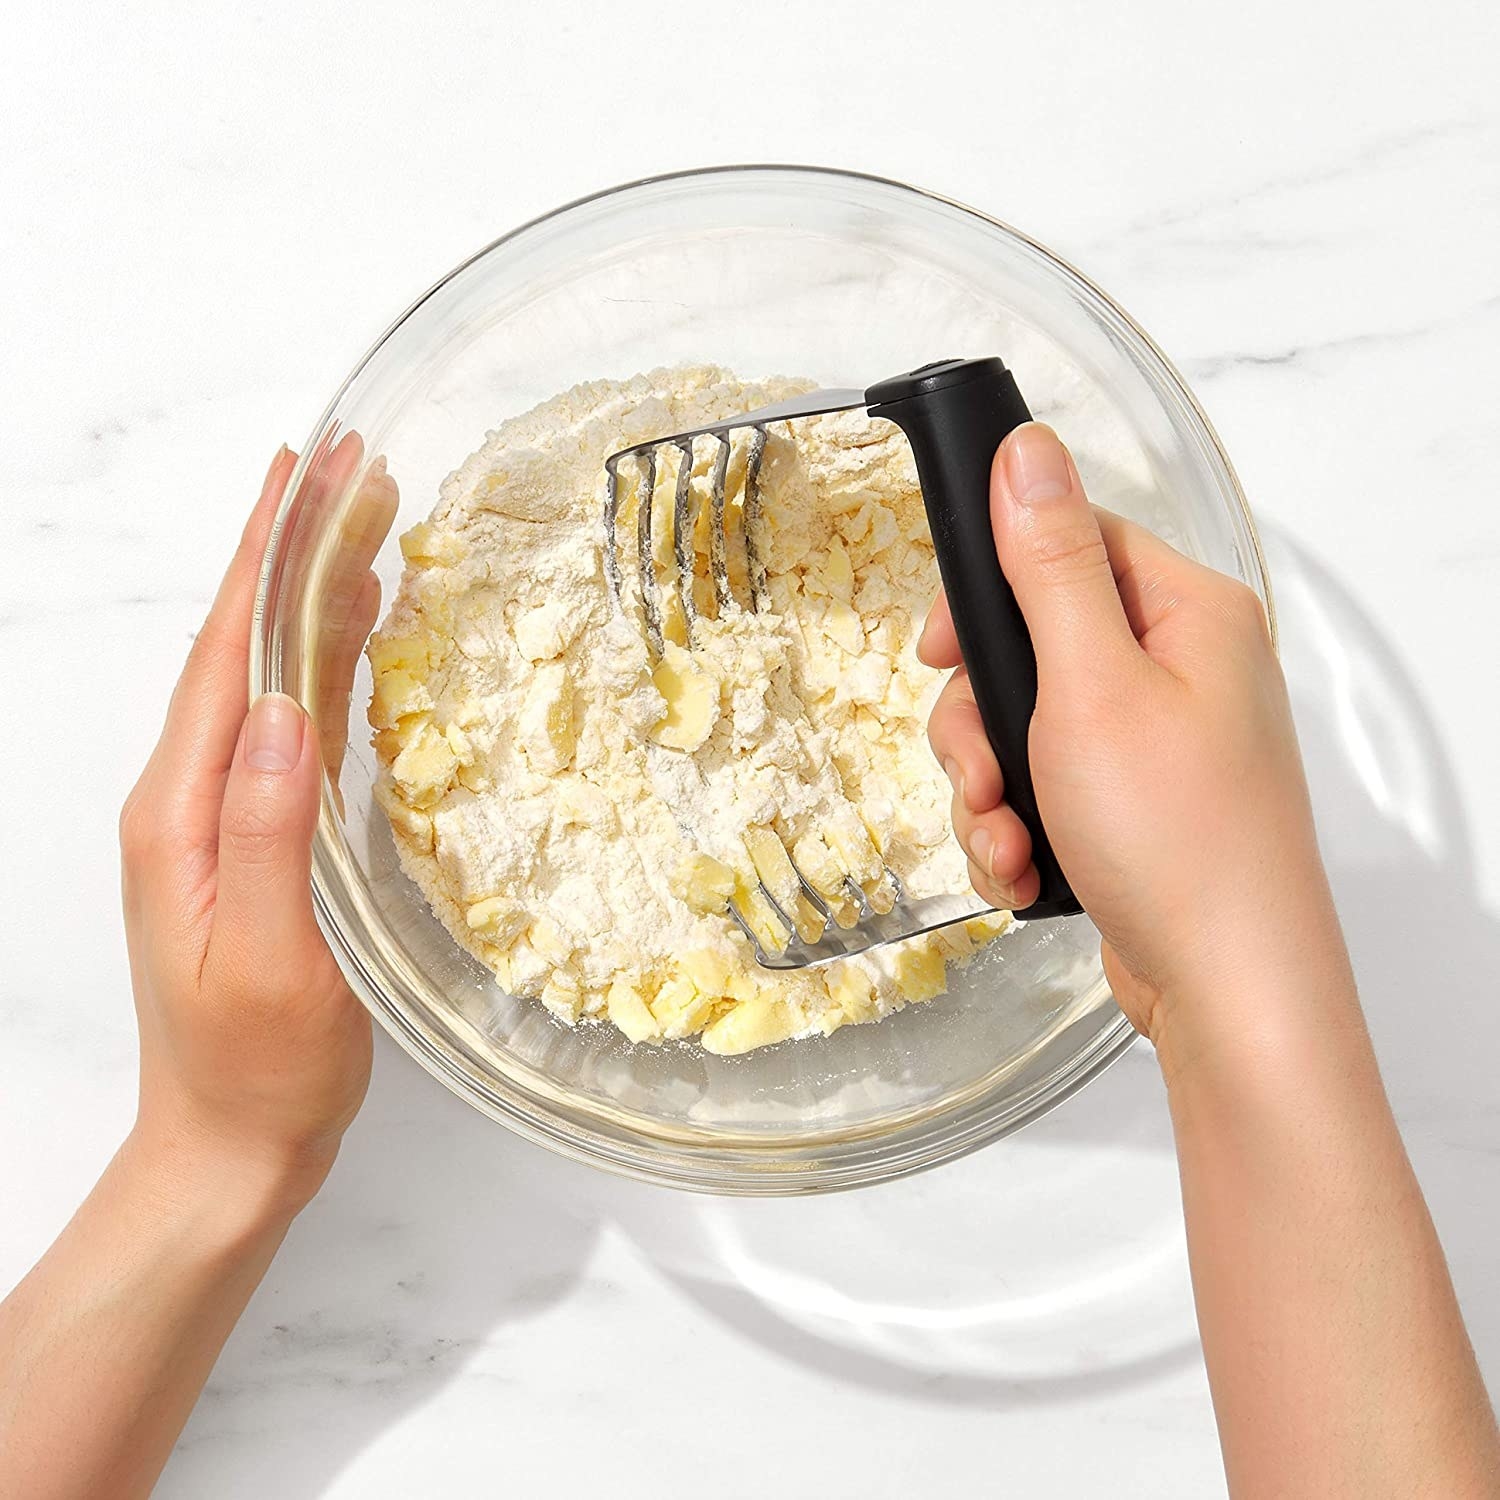 A person kneads butter into a bowl full of flour